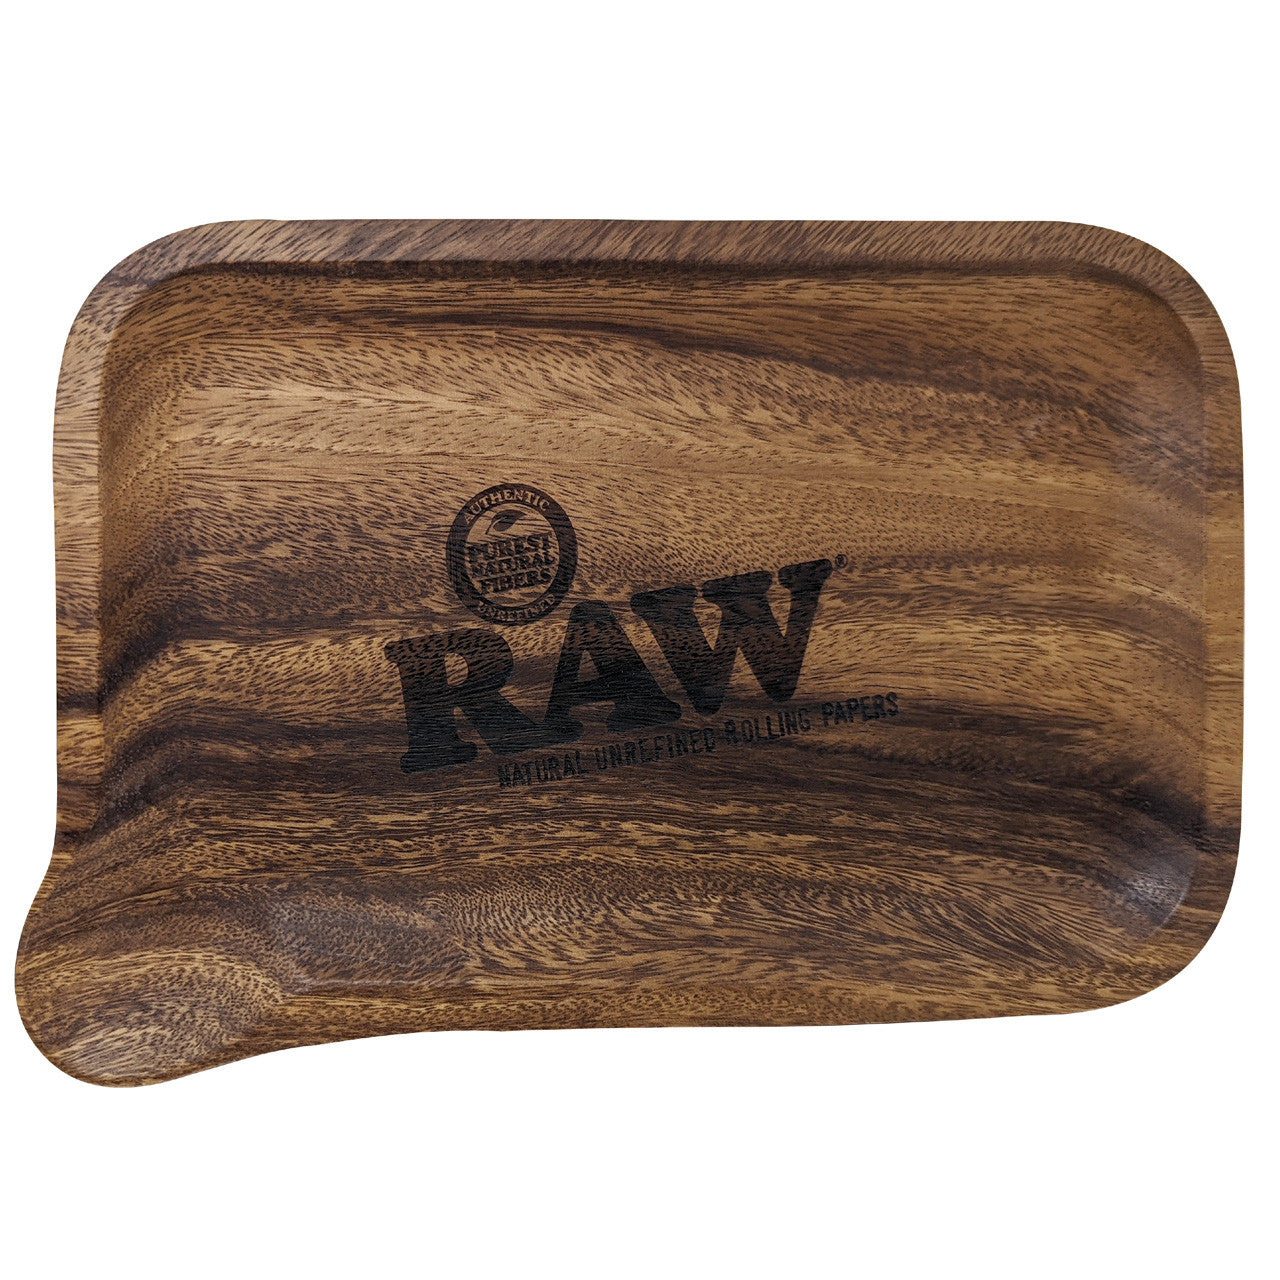 RAW Wooden Rolling Tray with Pour Spout